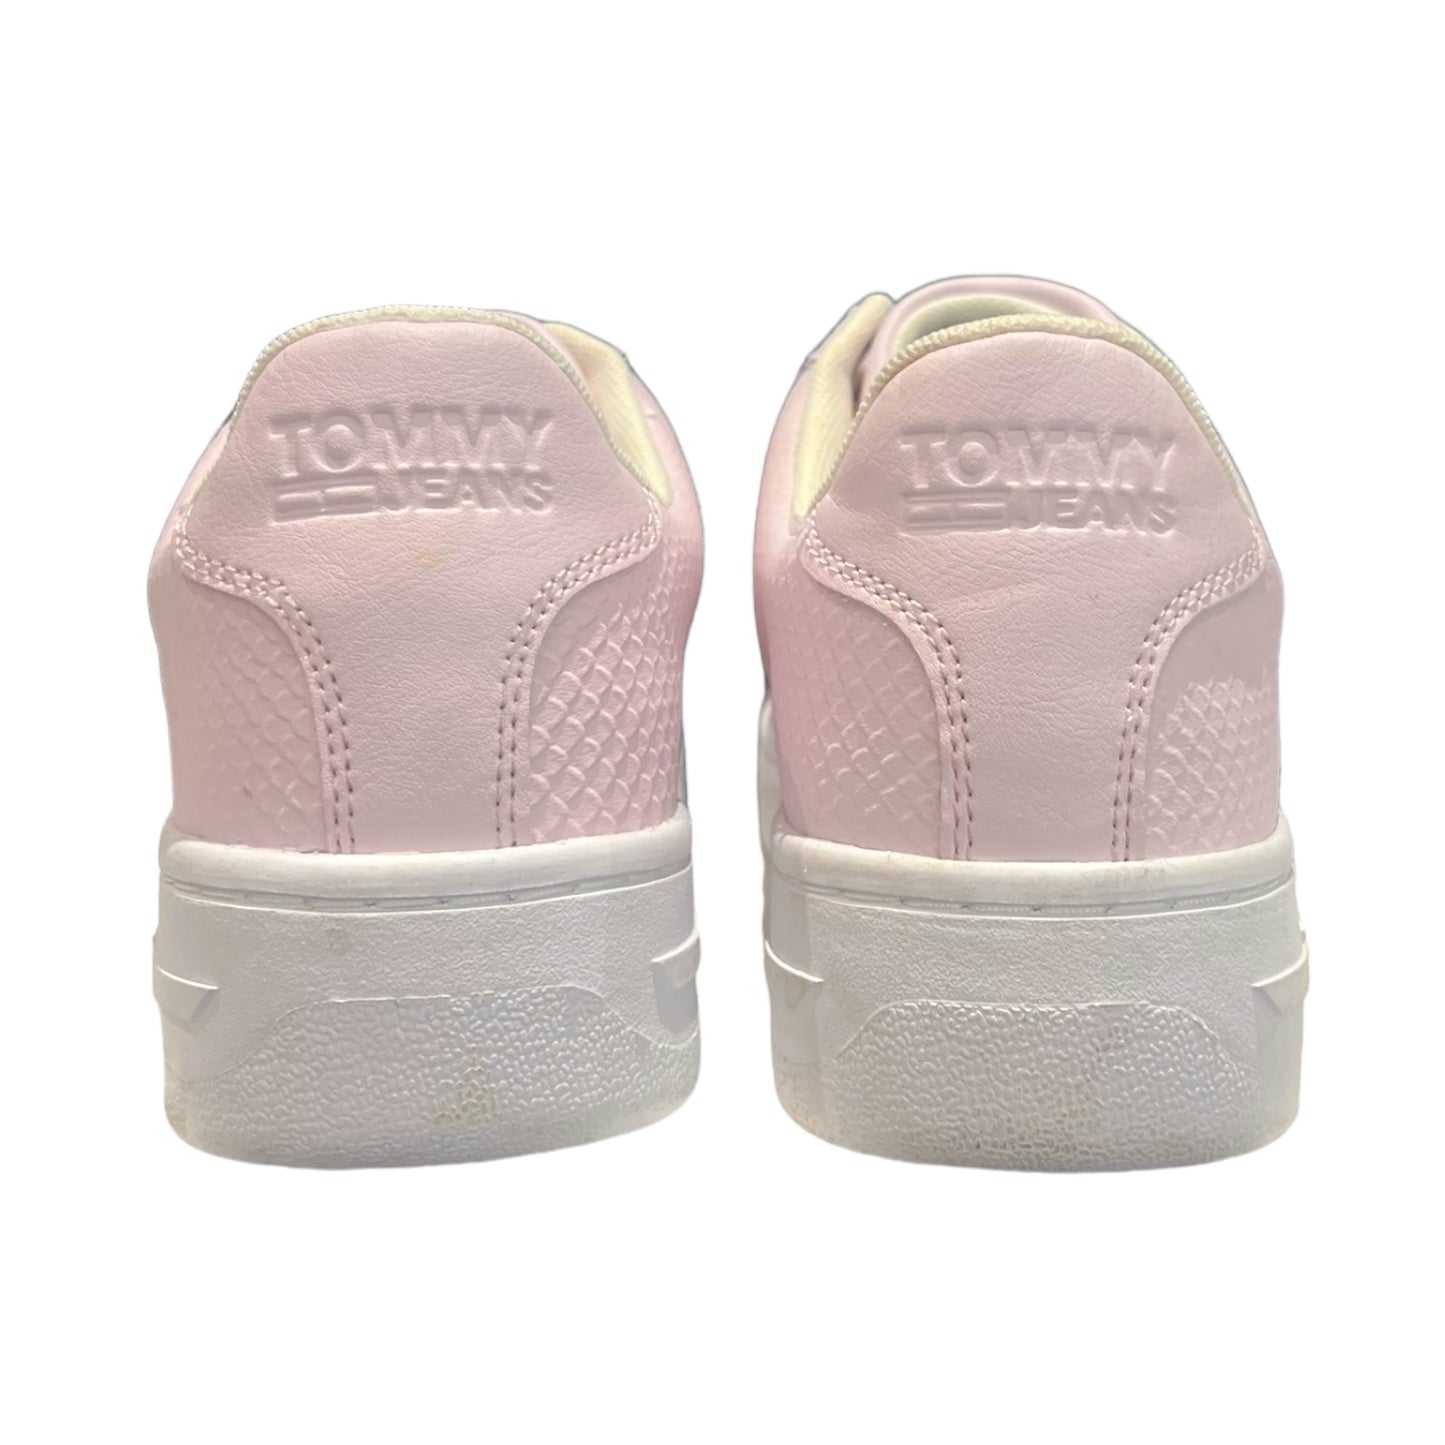 Tommy Hilfiger Pink Trainers - 6 - NEW